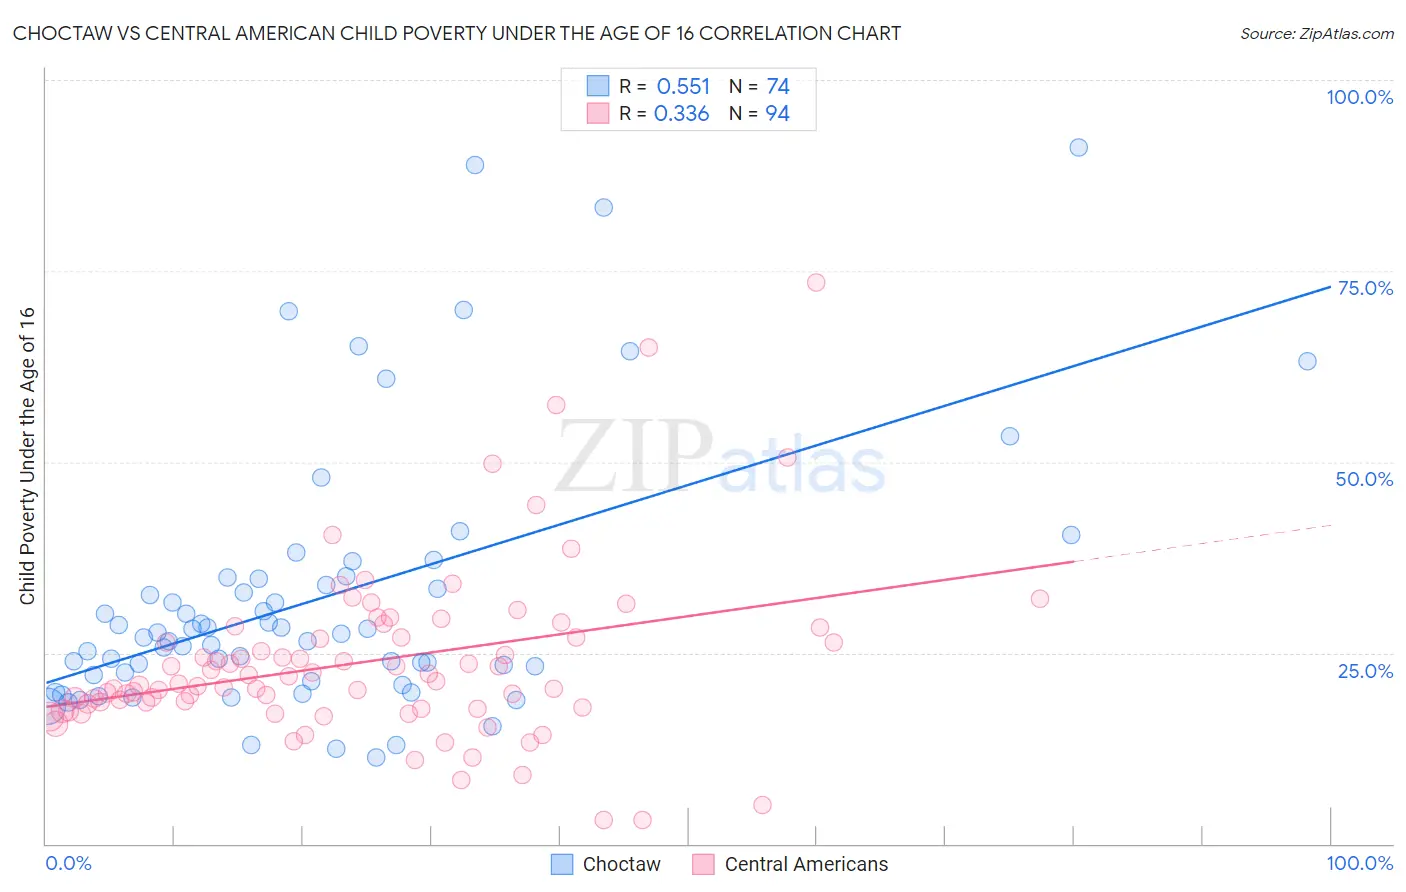 Choctaw vs Central American Child Poverty Under the Age of 16